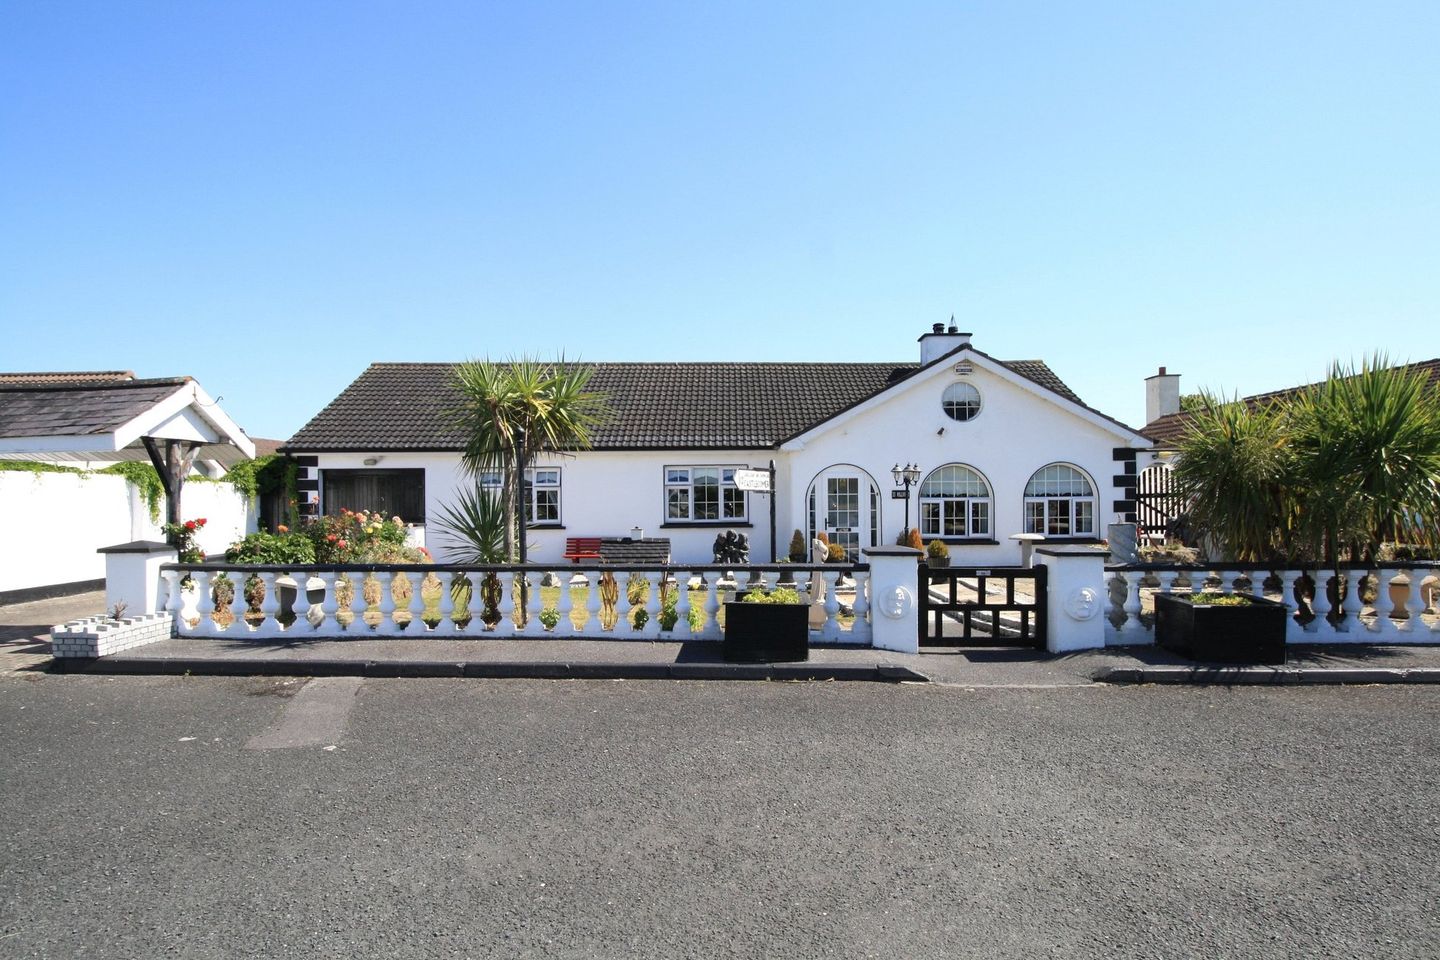 33 Idrone Park, Tullow Road, Carlow, Carlow Town, Co. Carlow